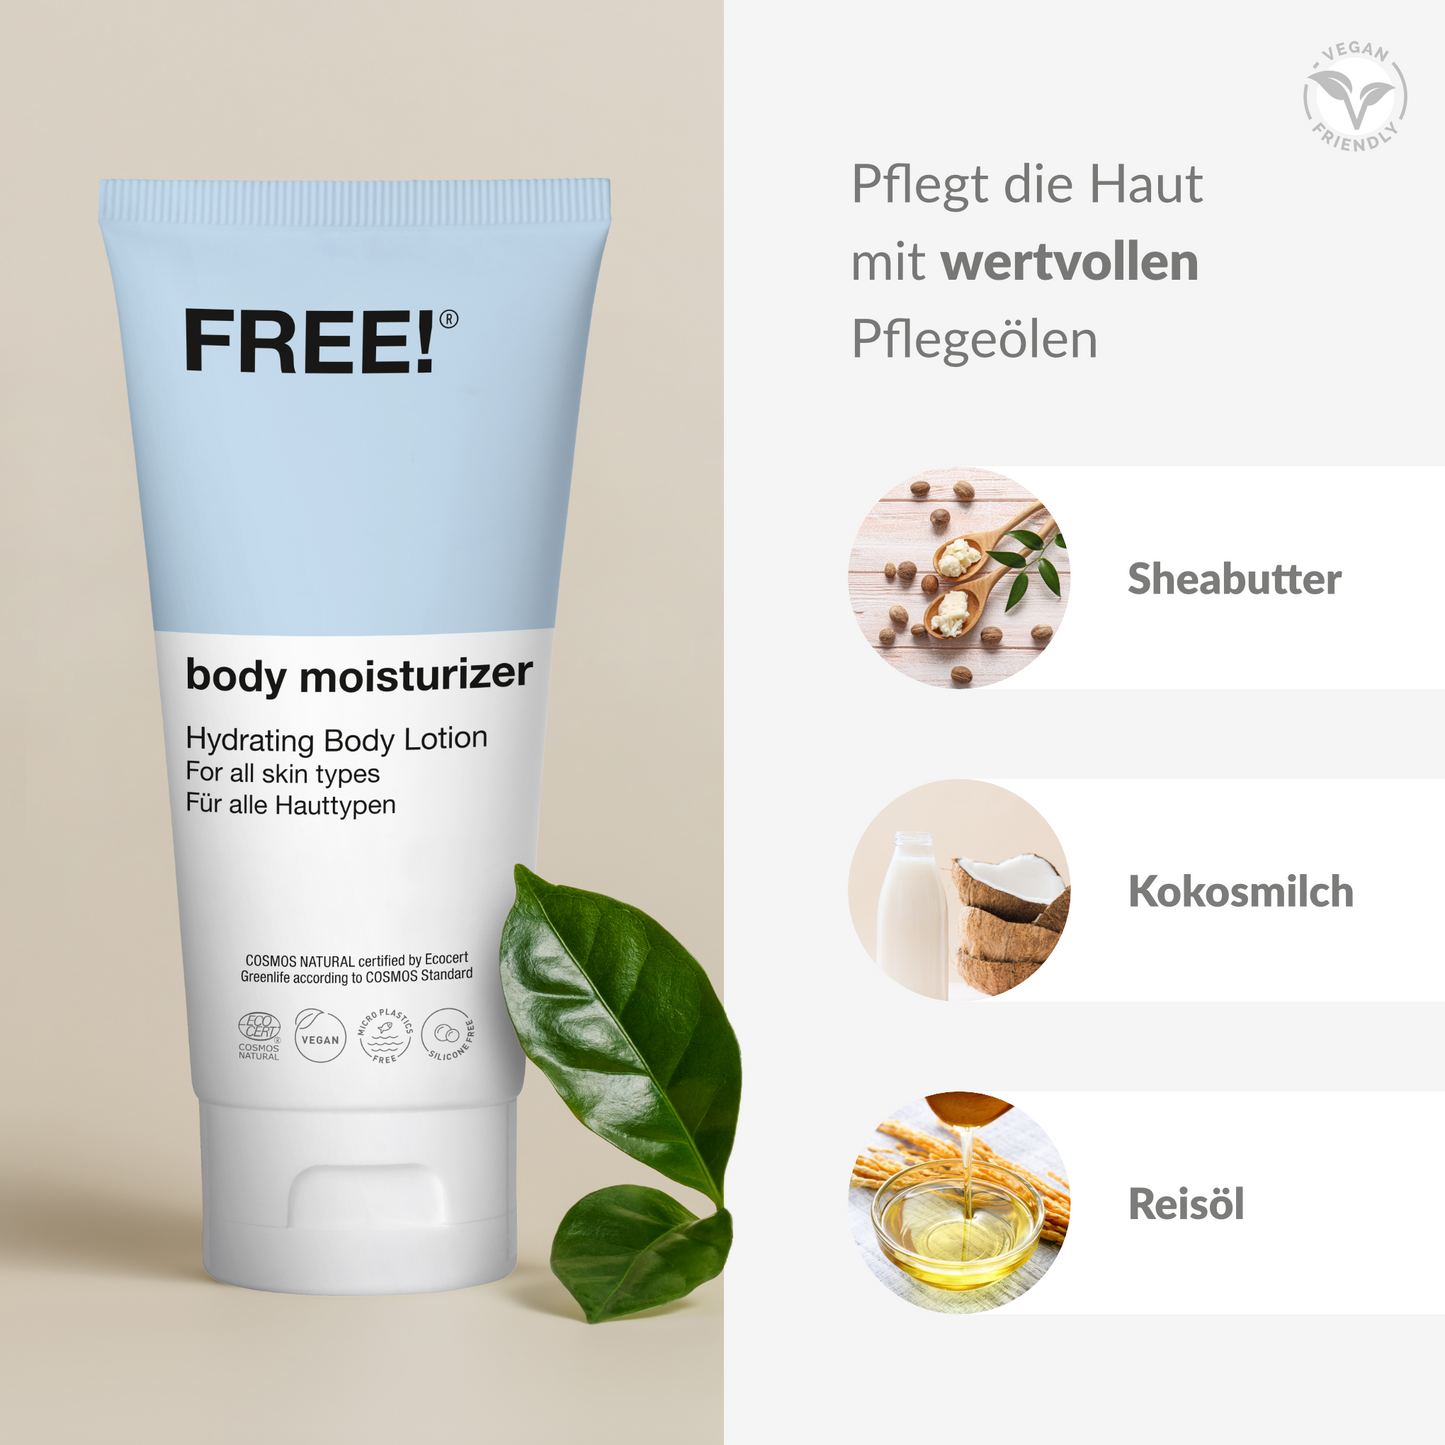 FREE! Hydrating Body Lotion